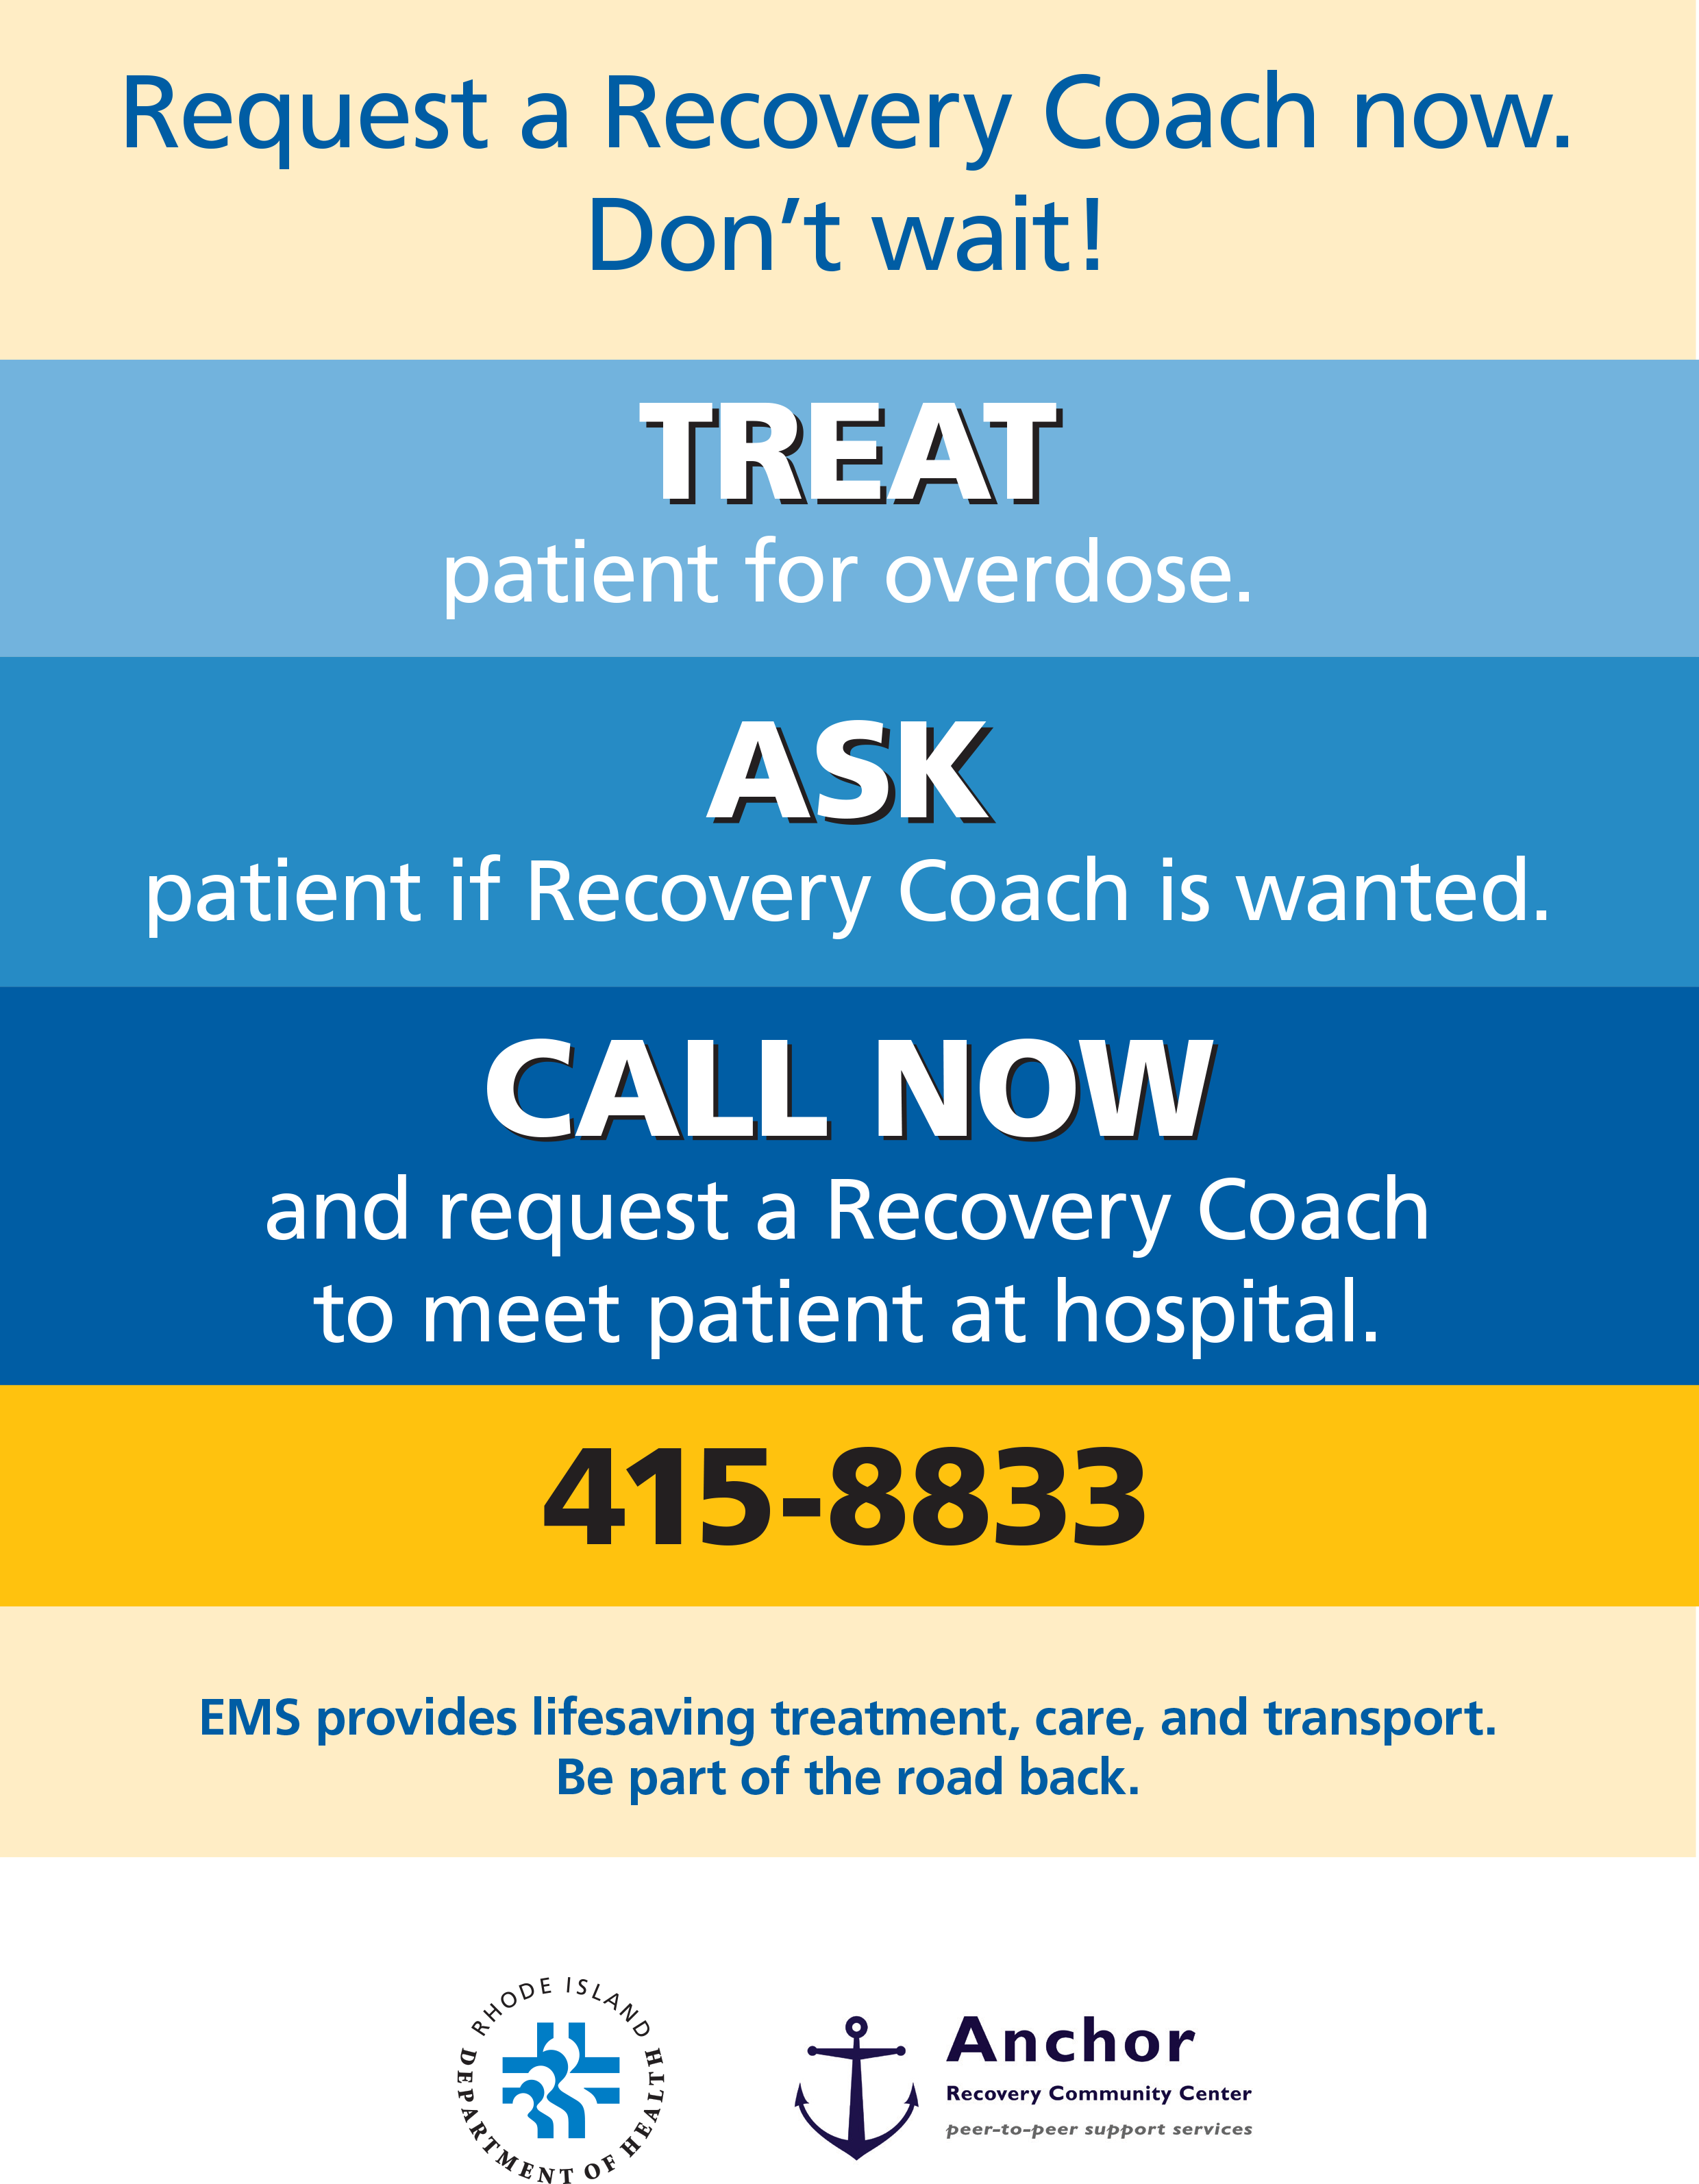 050916-emt-request-recovery-coach-flyer-002